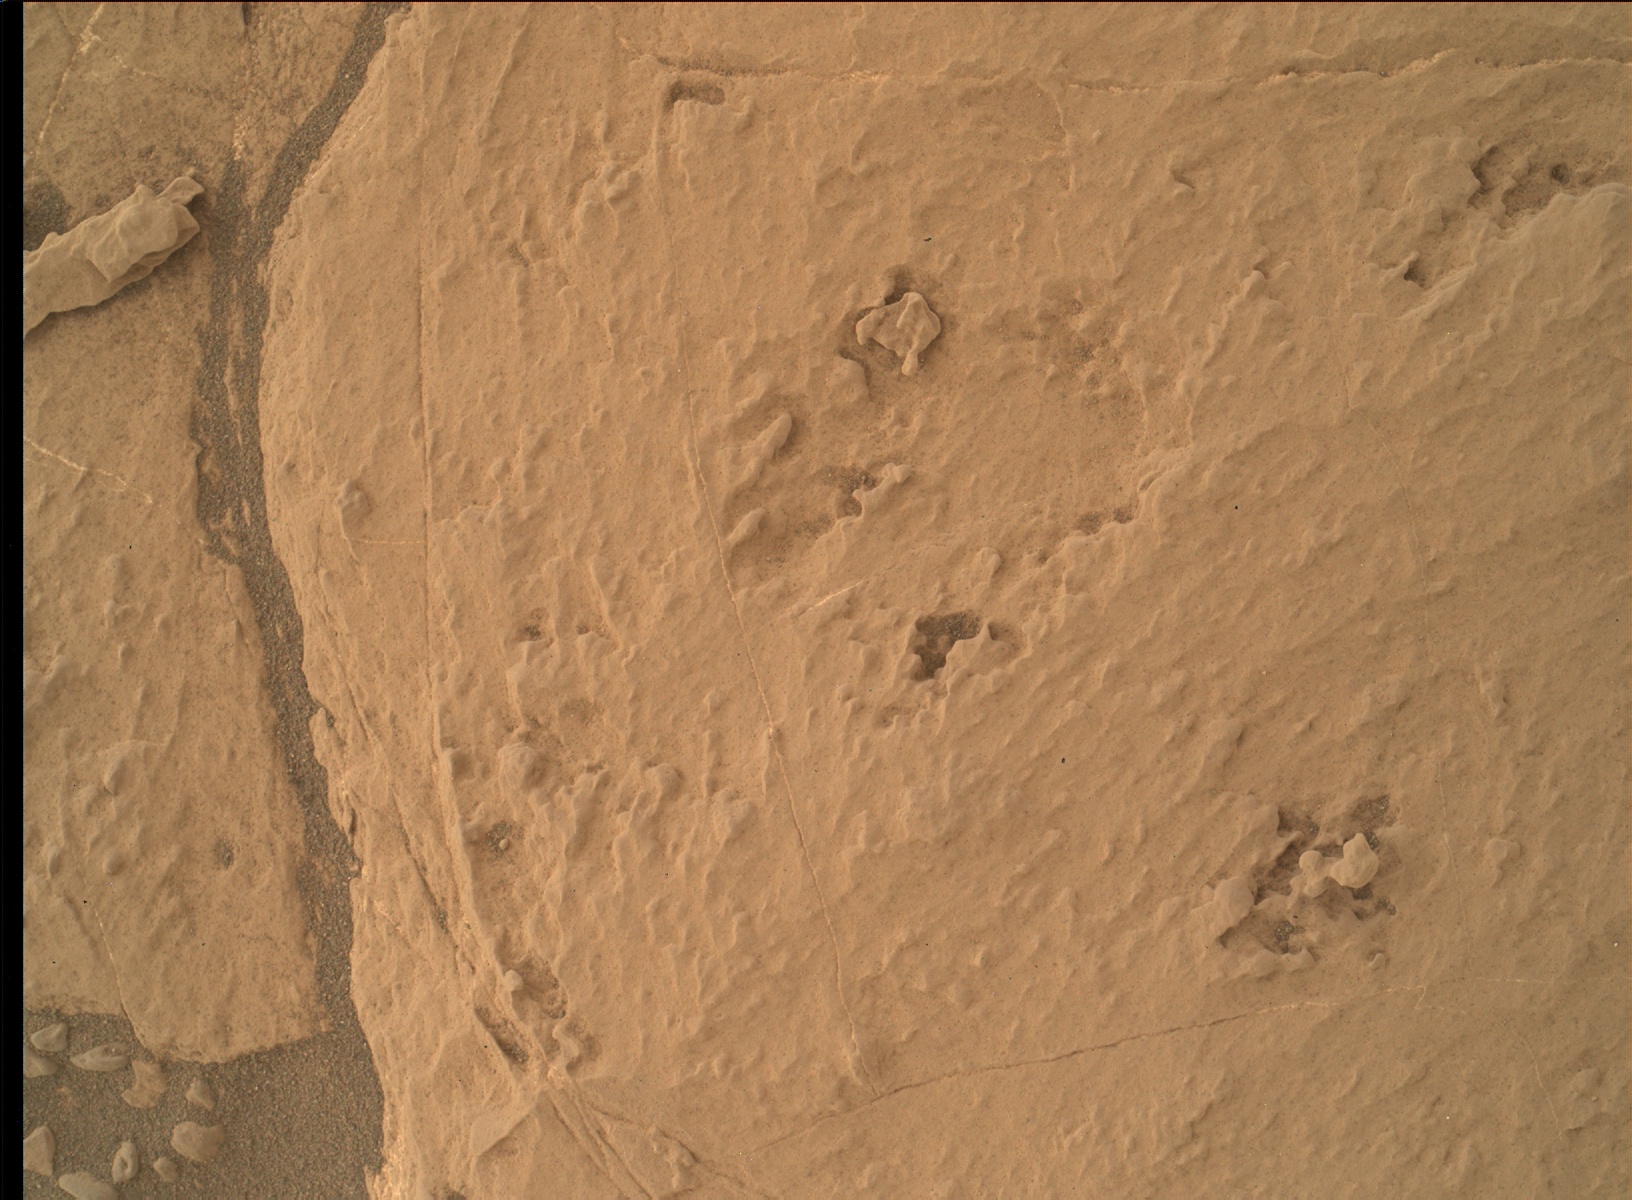 Nasa's Mars rover Curiosity acquired this image using its Mars Hand Lens Imager (MAHLI) on Sol 1868